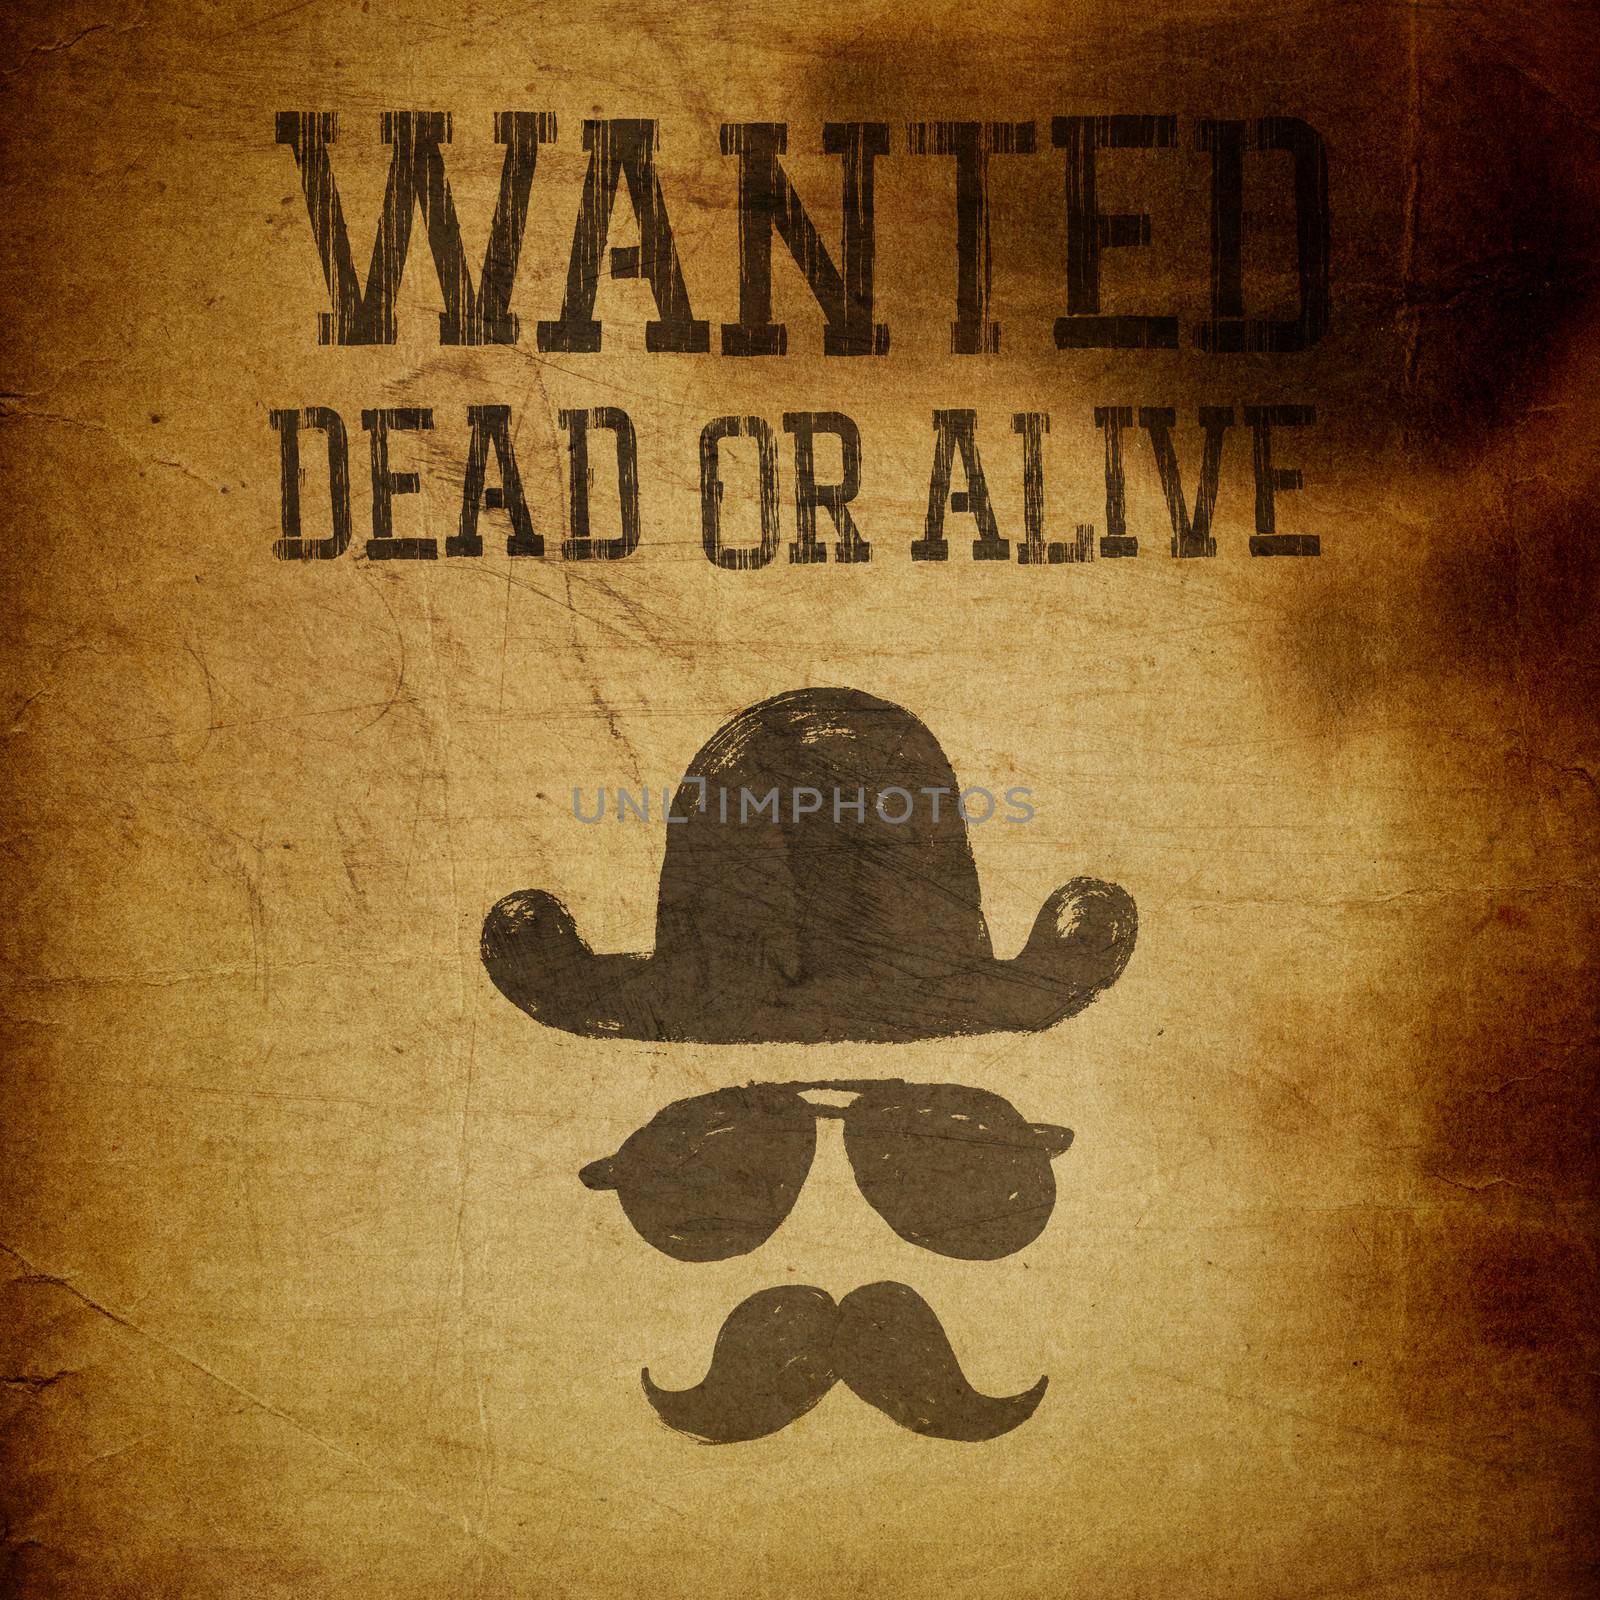 Vintage "Wanted..." poster, grunge illustration by pashabo